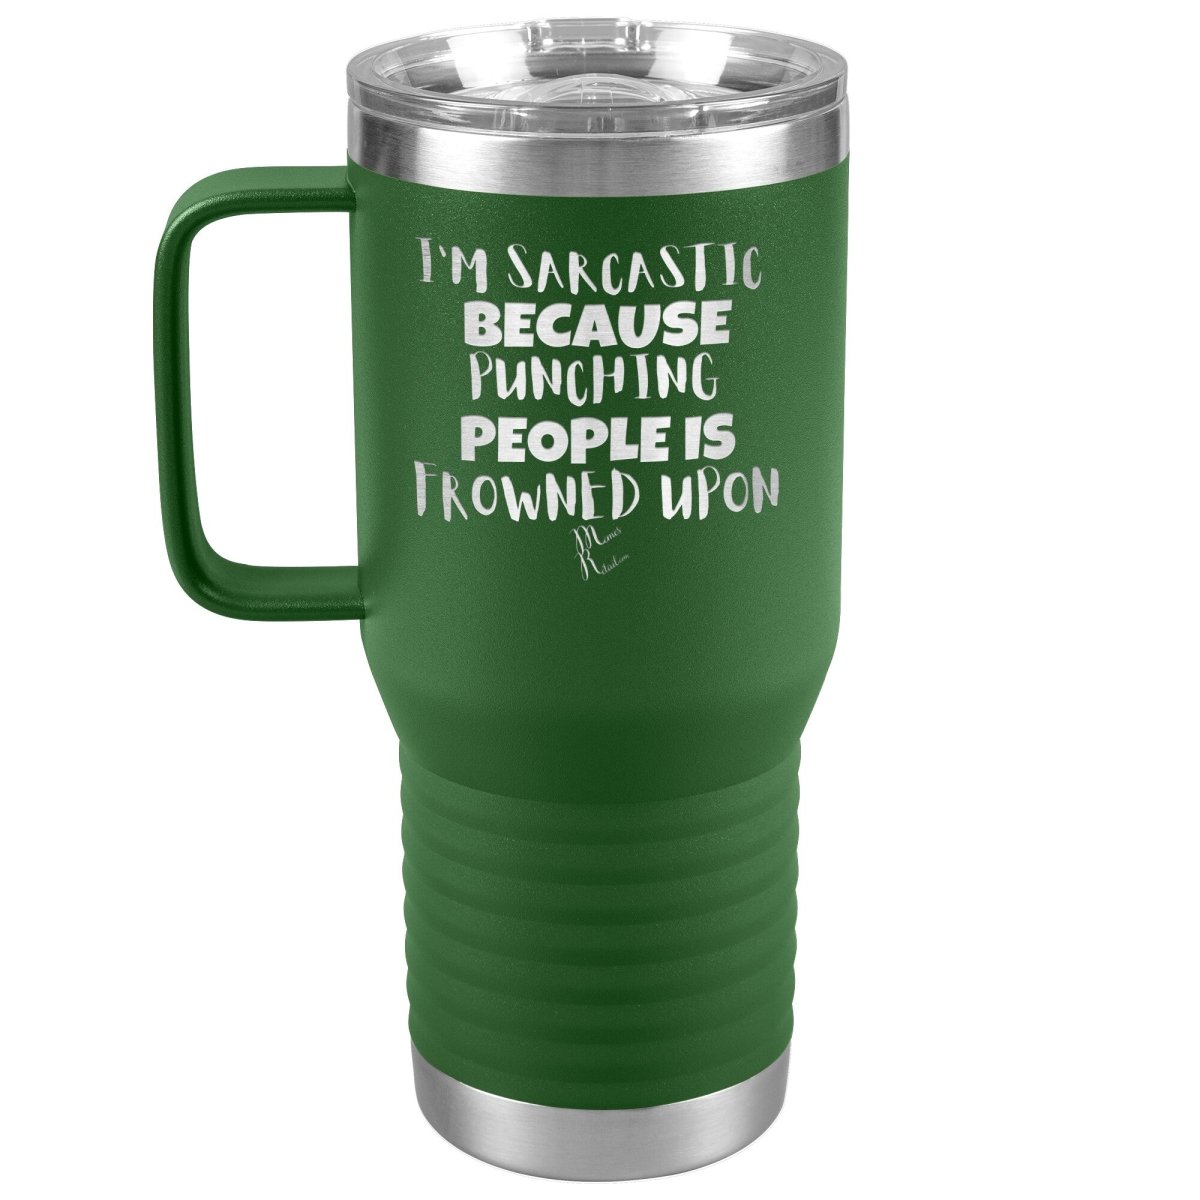 I'm Sarcastic Because Punching People is Frowned Upon Tumblers, 20oz Travel Tumbler / Green - MemesRetail.com